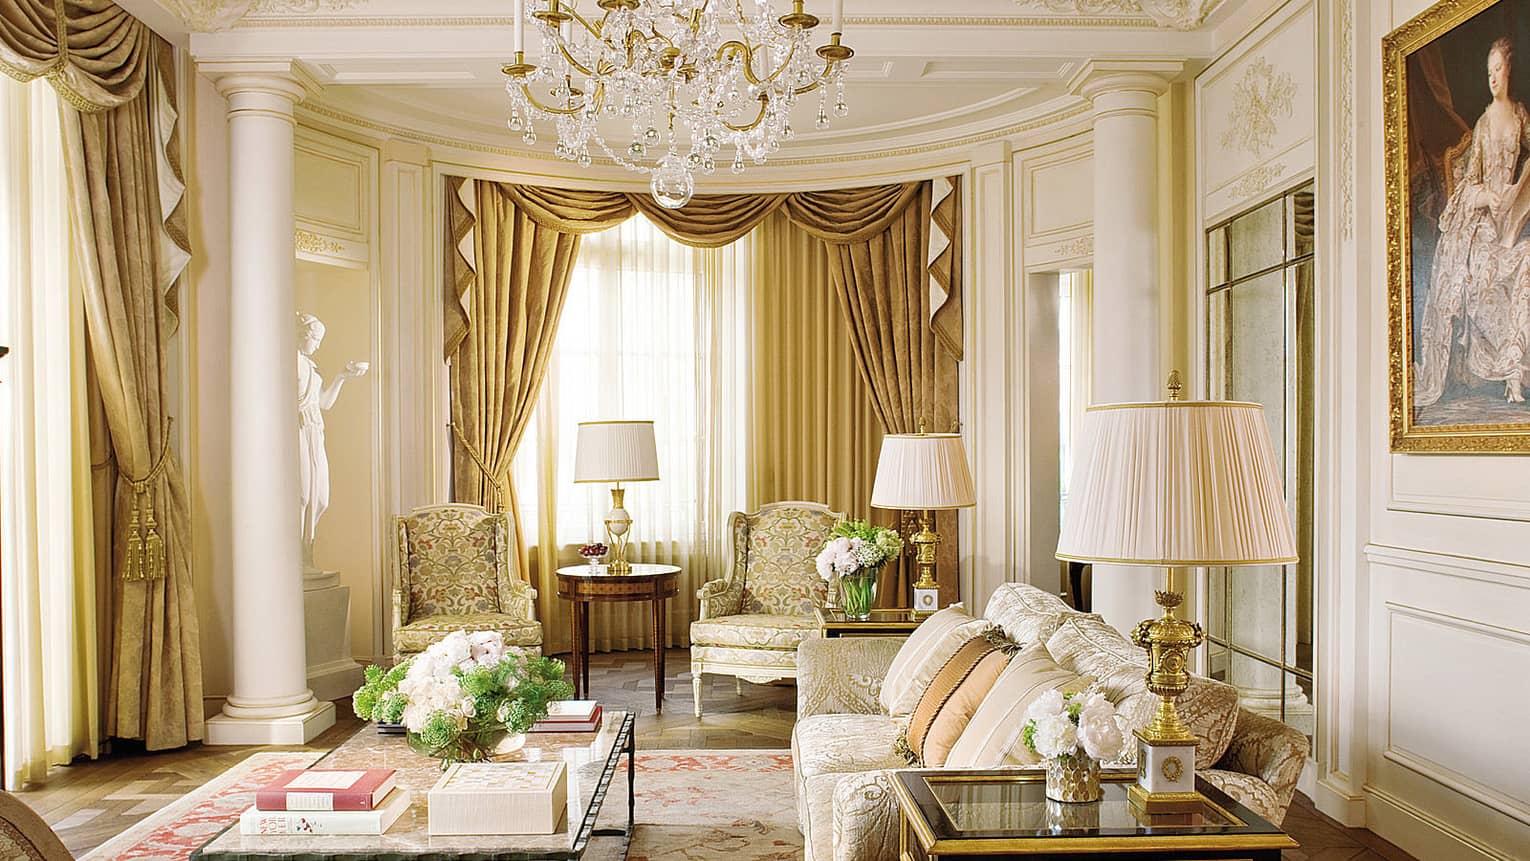 Elegant Royal Suite living room with cream floral sofas and decor, crystal chandelier, white statue, large oil painting